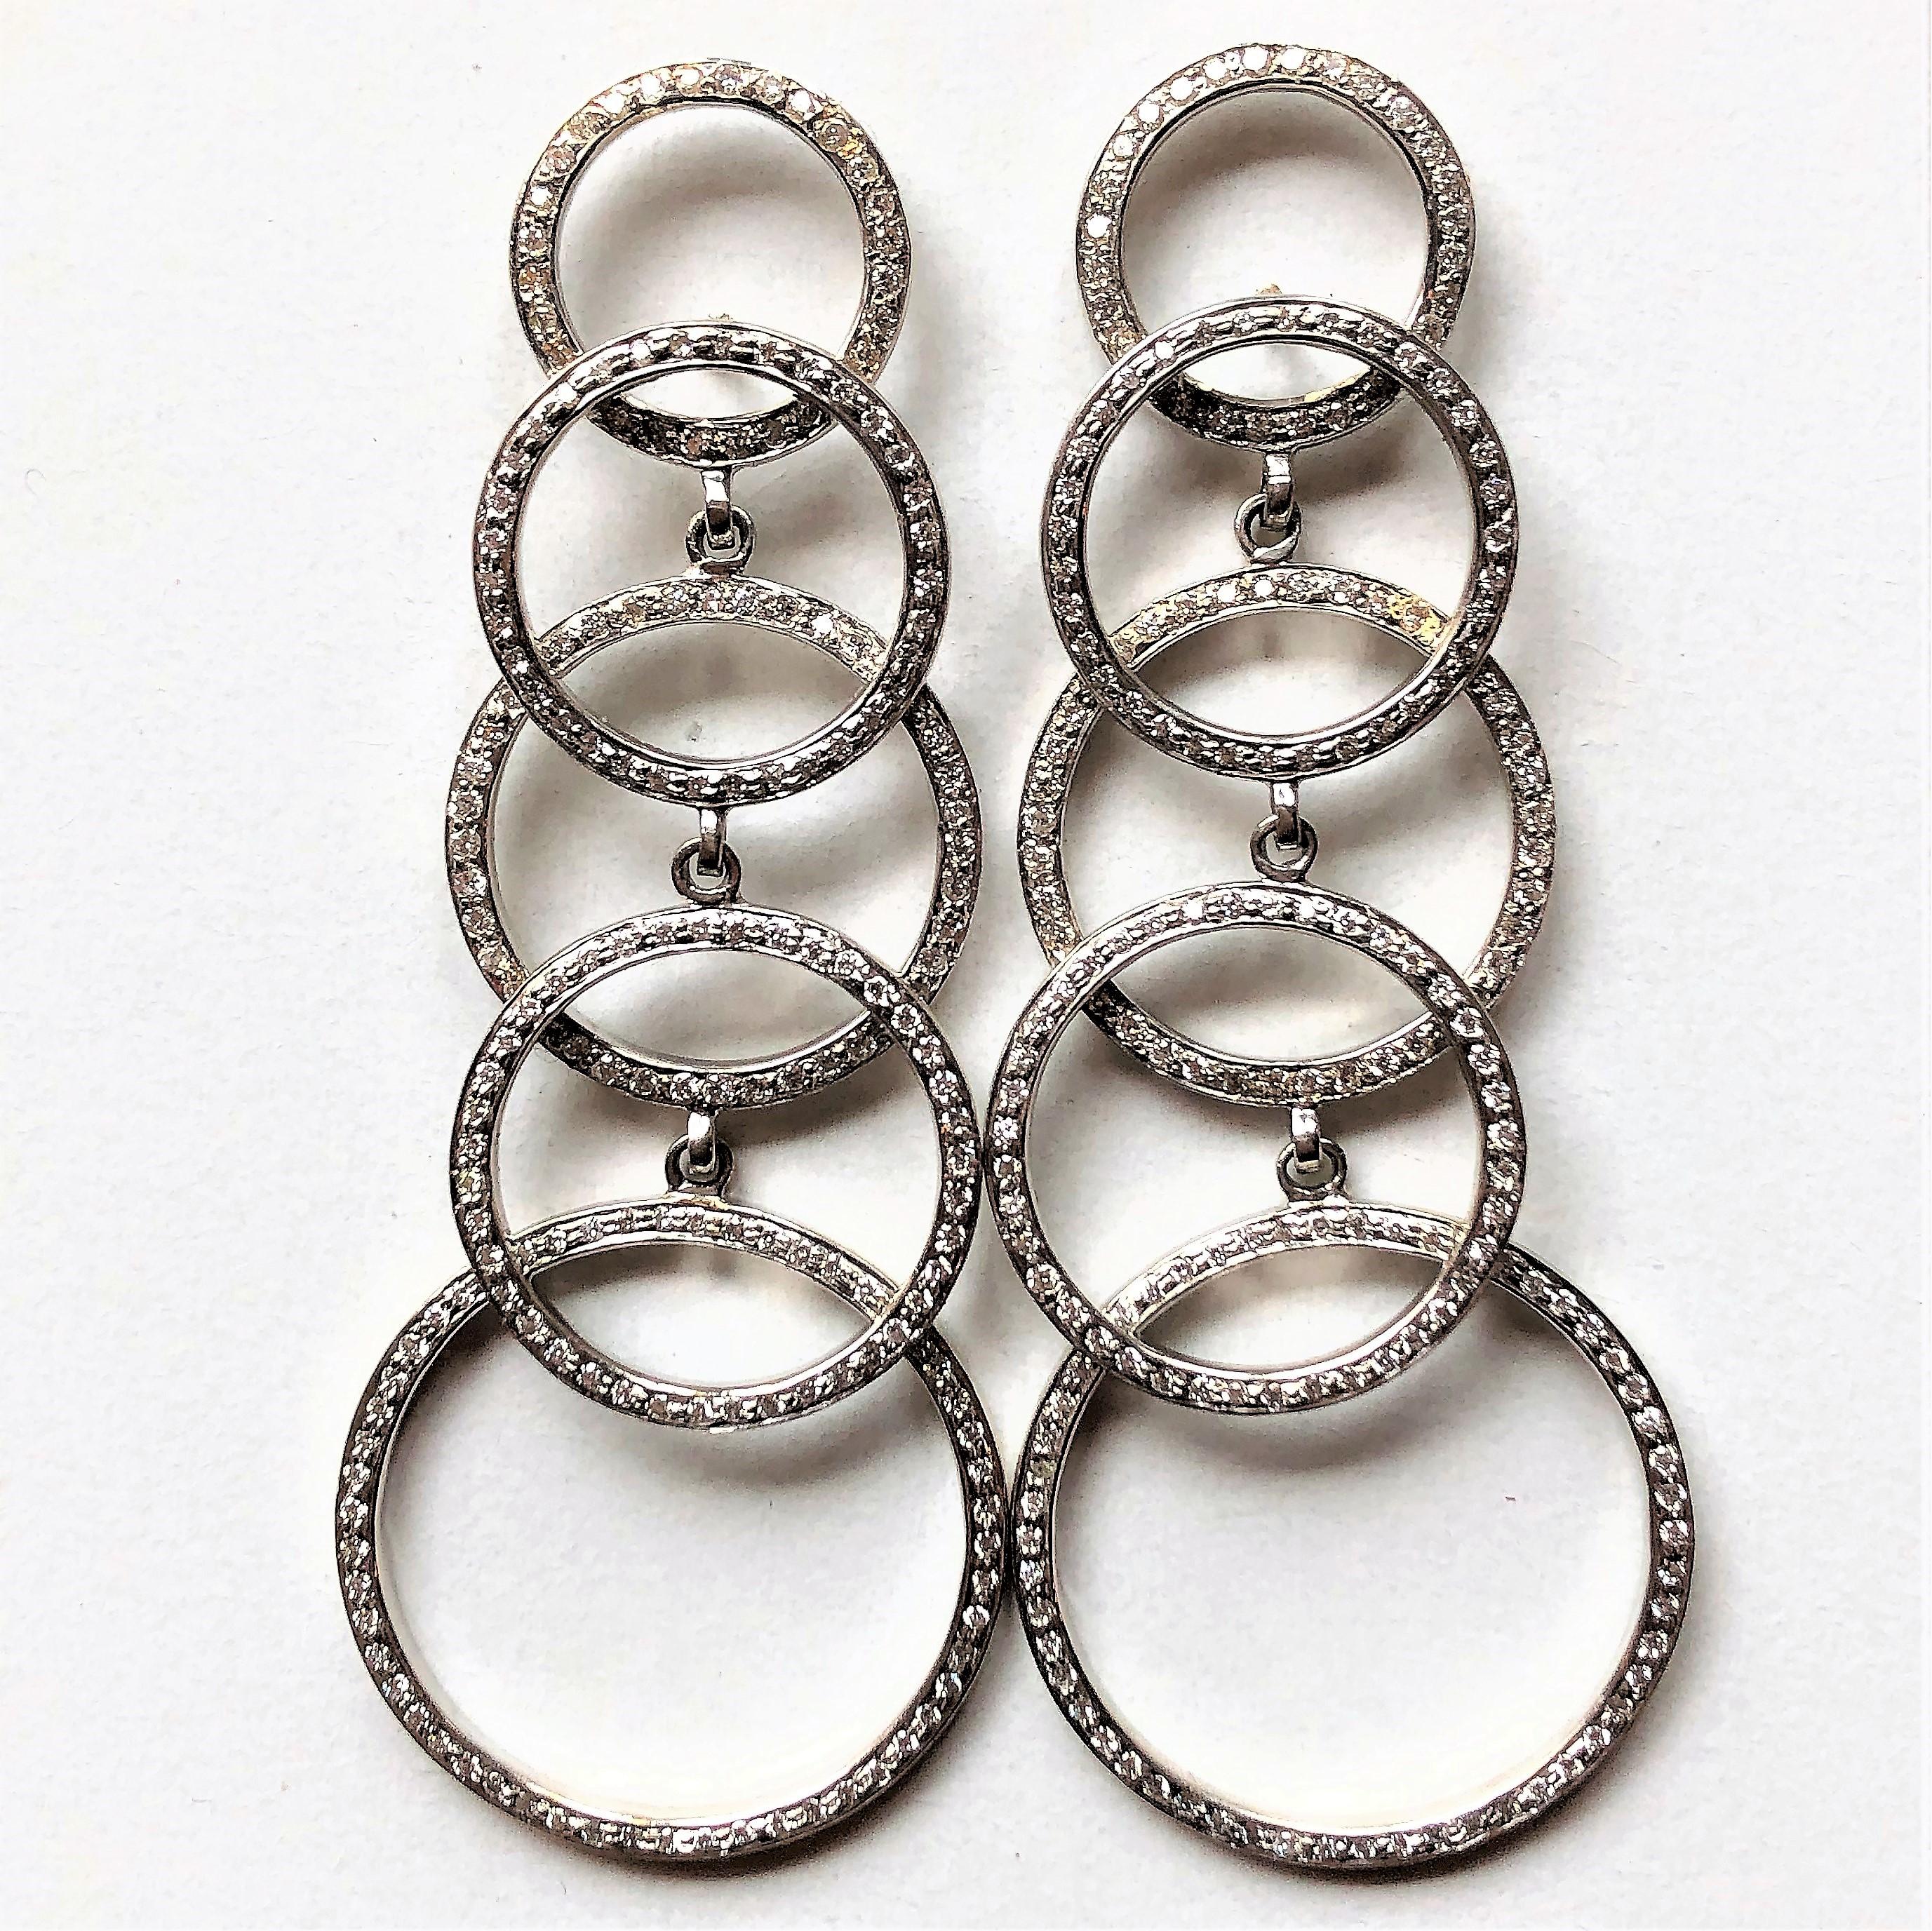 Gracefully cascading, these contemporary, 18K White Gold earrings are set with  round diamonds weighing approximately 3.75ct total.  Measuring just over 2 3/4 inch long
(2  13/16 inch) by 1 1/16 inch at the widest circle on the bottom. They are